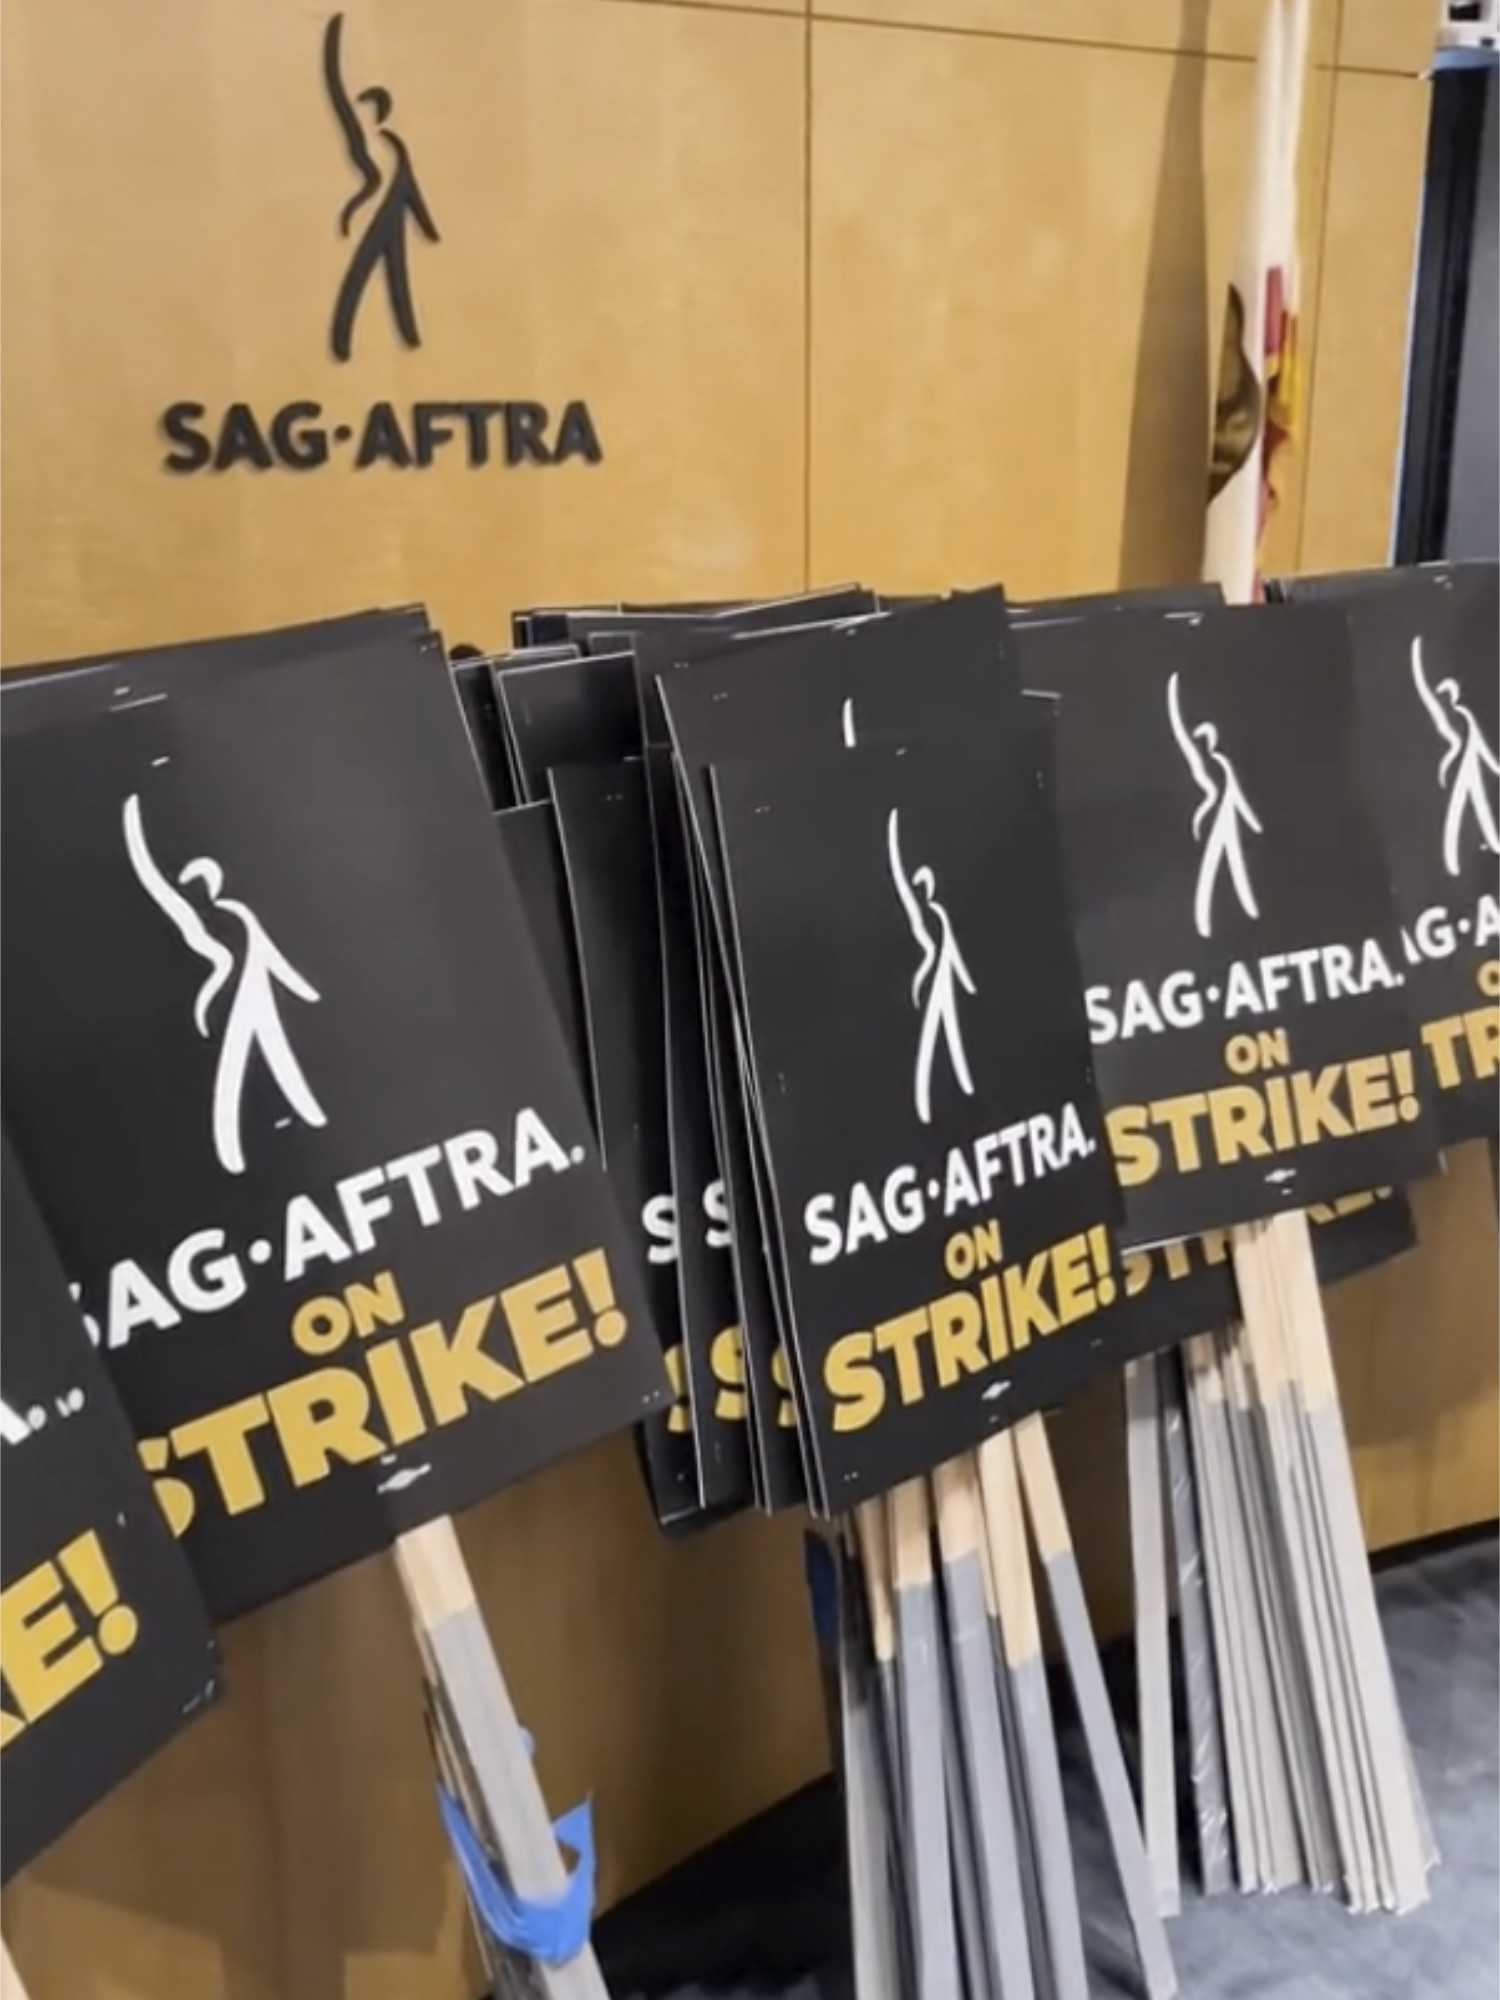 SAGAFTRA Is Officially On Strike, The Actors Will Stop Work Indefinitely StrippedPixel